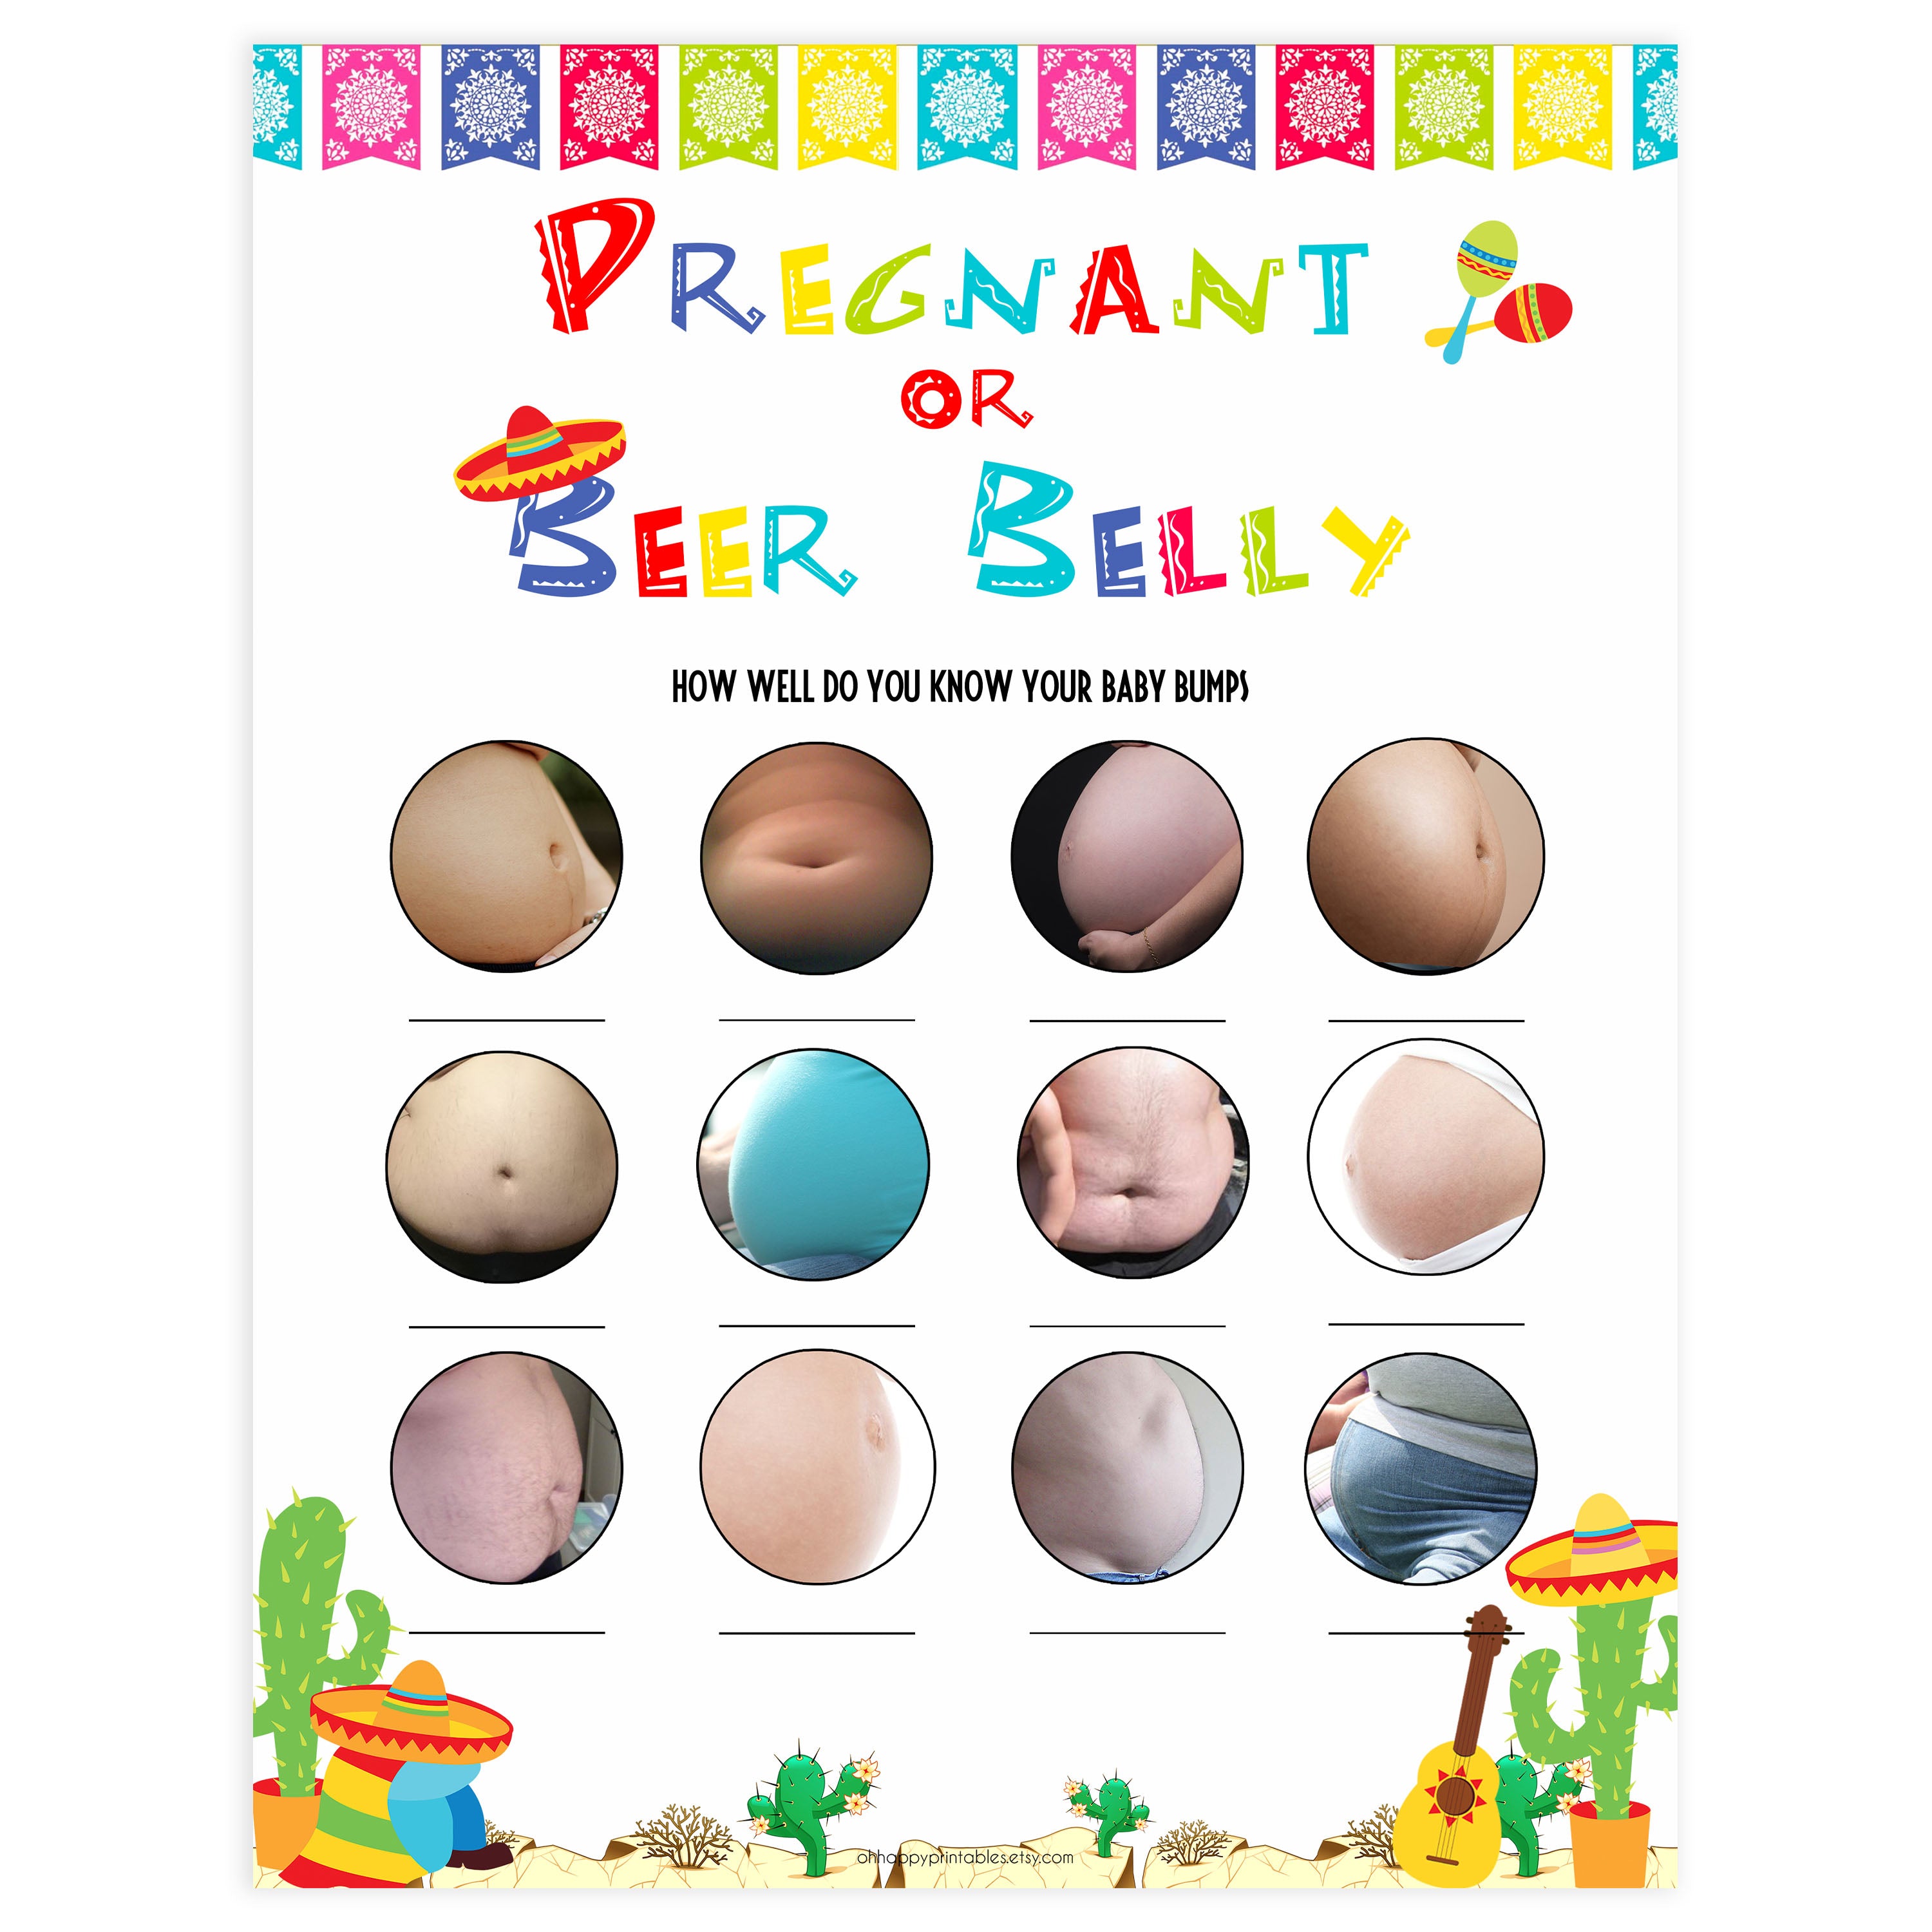 pregnancy or beer belly game, baby bump game, Printable baby shower games, Mexican fiesta fun baby games, baby shower games, fun baby shower ideas, top baby shower ideas, fiesta shower baby shower, fiesta baby shower ideas